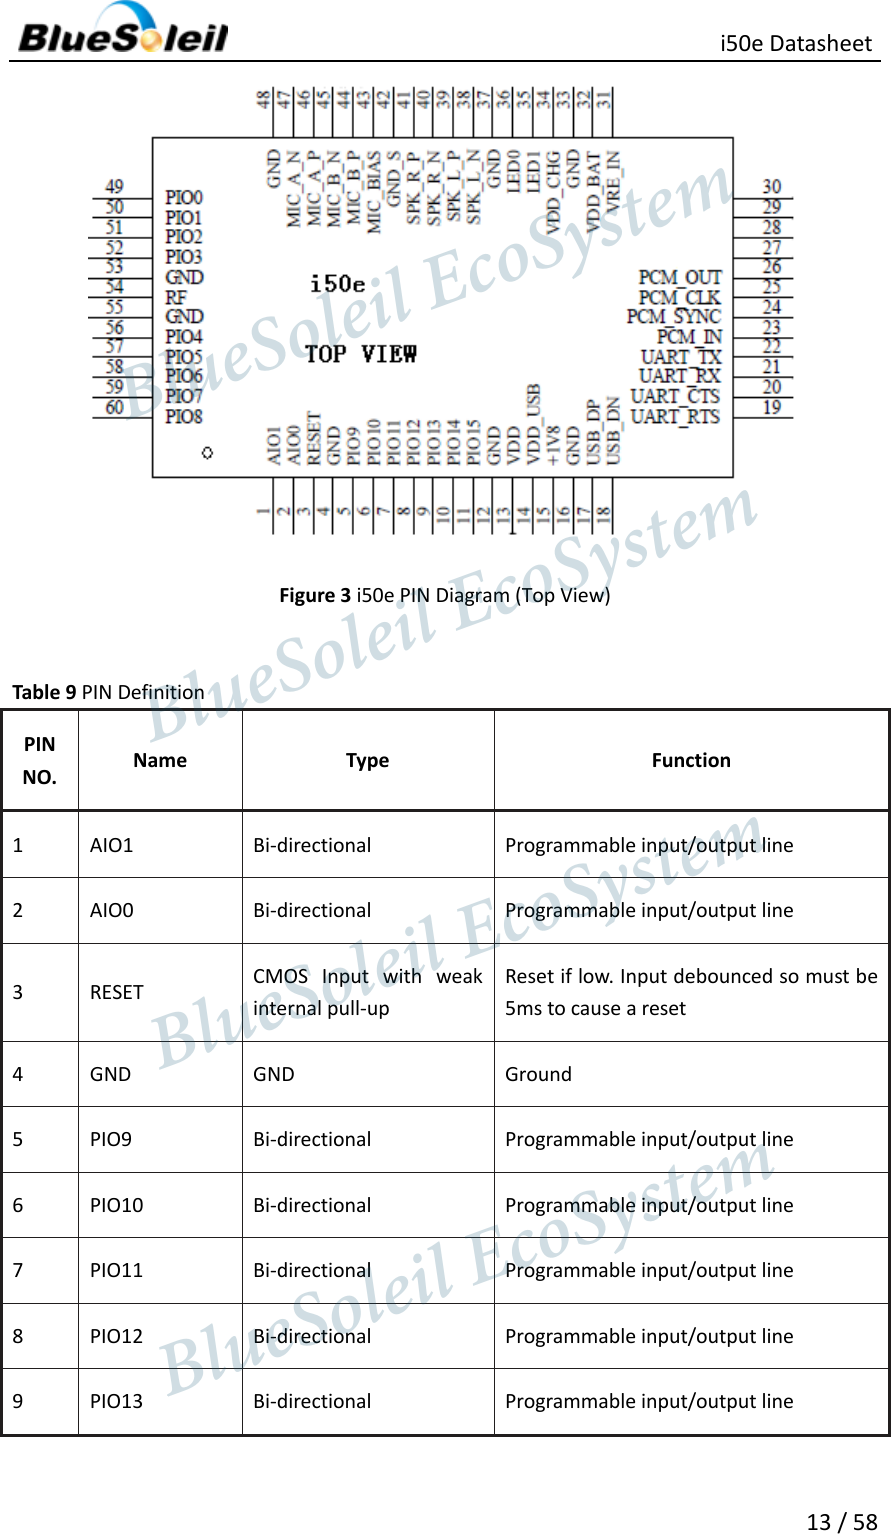                                                   i50e Datasheet 13 / 58  Figure 3 i50e PIN Diagram (Top View)  Table 9 PIN Definition   PIN NO. Name Type Function 1 AIO1 Bi-directional Programmable input/output line 2 AIO0 Bi-directional Programmable input/output line 3 RESET CMOS  Input  with  weak internal pull-up Reset if low. Input debounced so must be 5ms to cause a reset 4 GND GND Ground 5 PIO9 Bi-directional Programmable input/output line 6 PIO10 Bi-directional Programmable input/output line 7 PIO11 Bi-directional Programmable input/output line 8 PIO12 Bi-directional Programmable input/output line 9 PIO13 Bi-directional Programmable input/output line                  BlueSoleil EcoSystem            BlueSoleil EcoSystem      BlueSoleil EcoSystemBlueSoleil EcoSystem